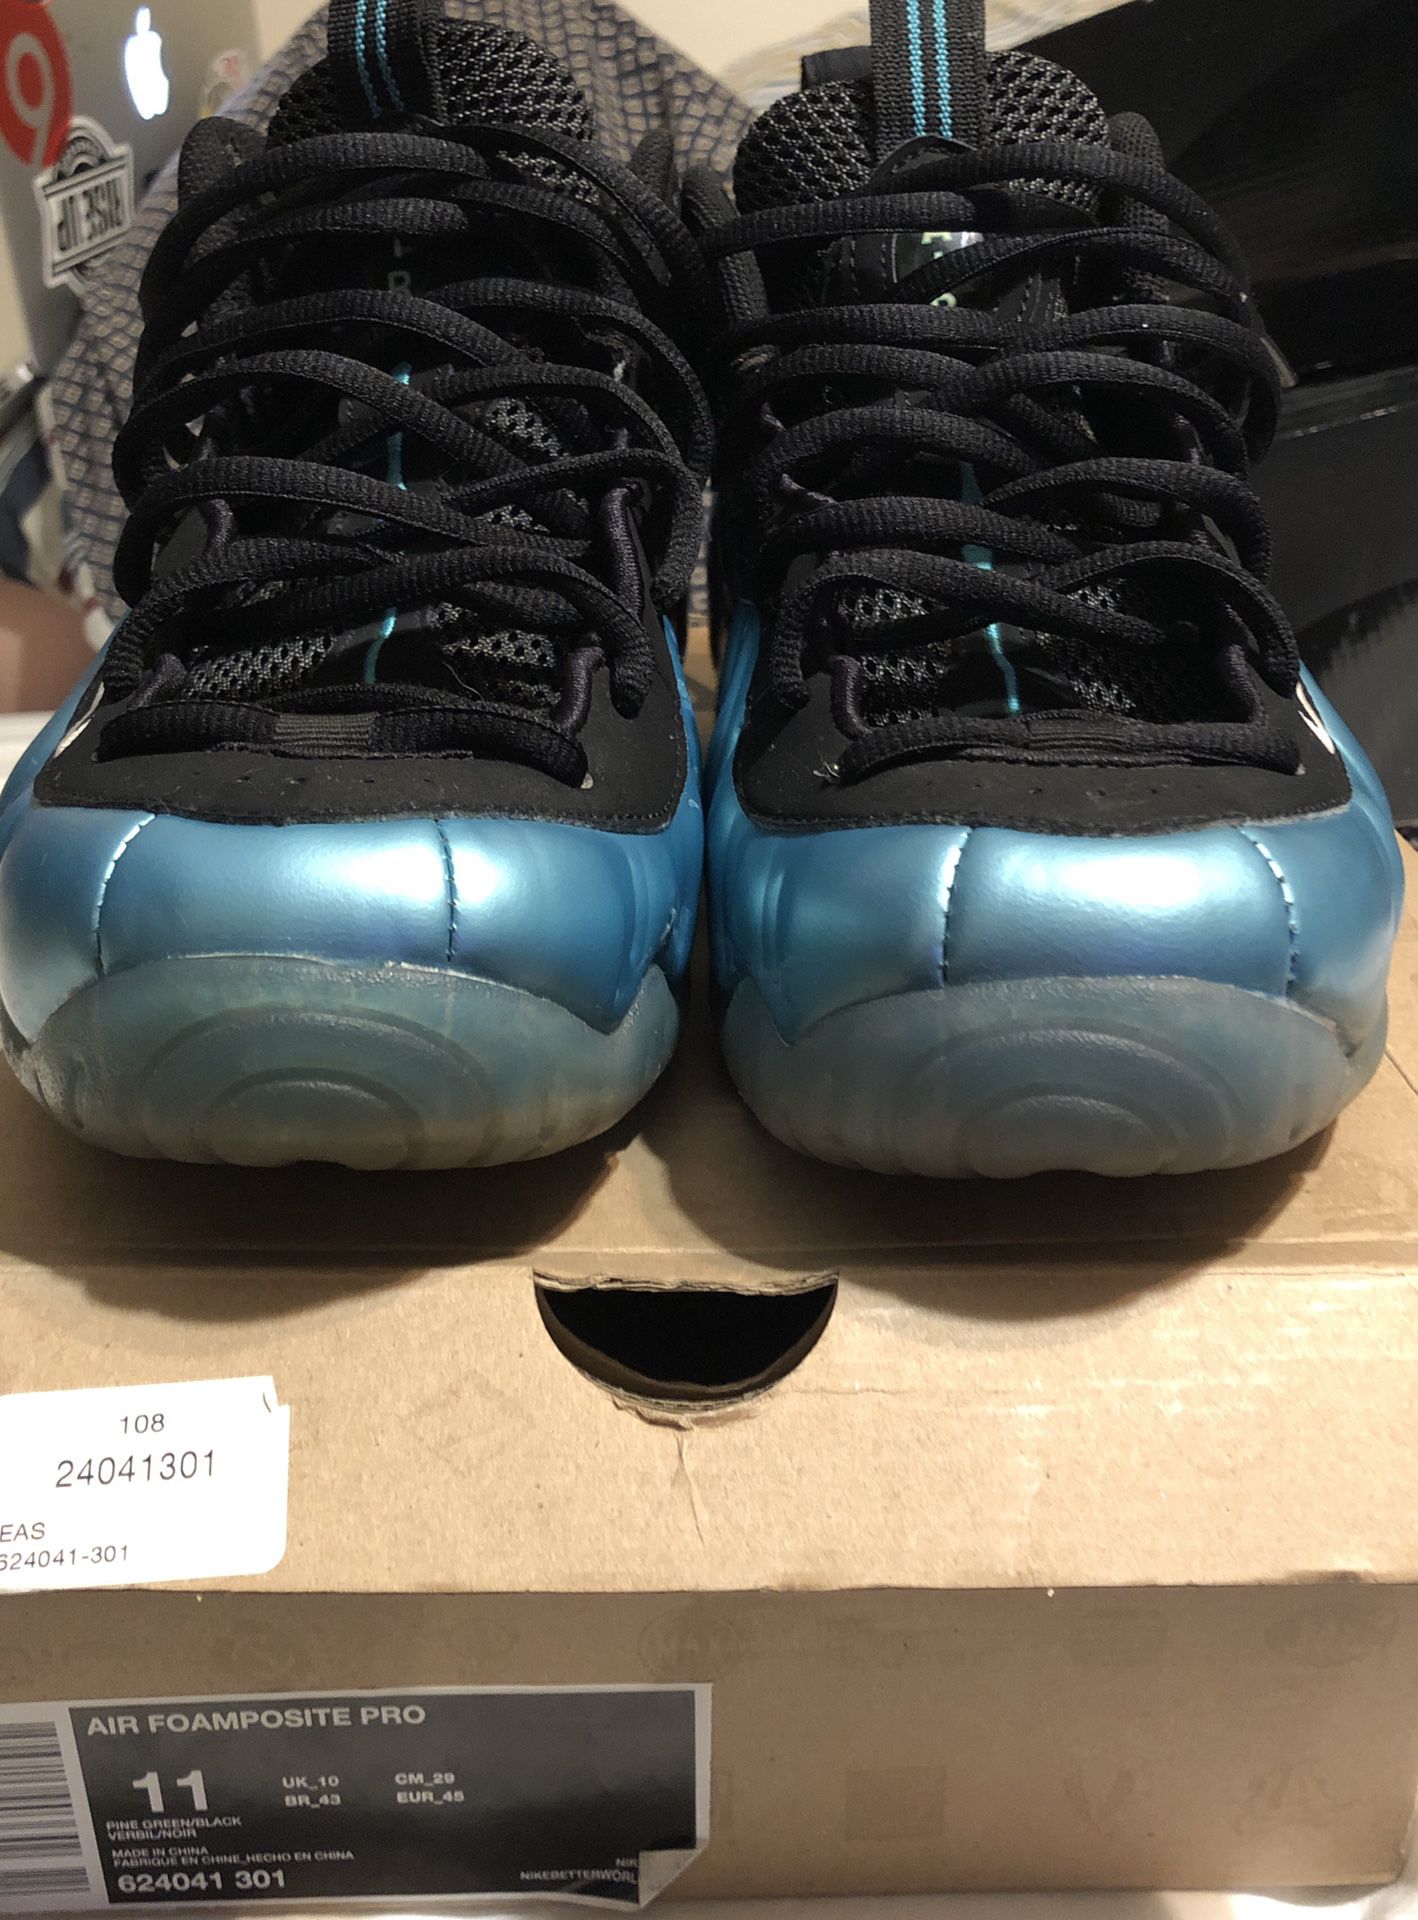 Air Foamposite Pro (Electric Blue), Size 11, Perfect Condition. Worn 8 times.